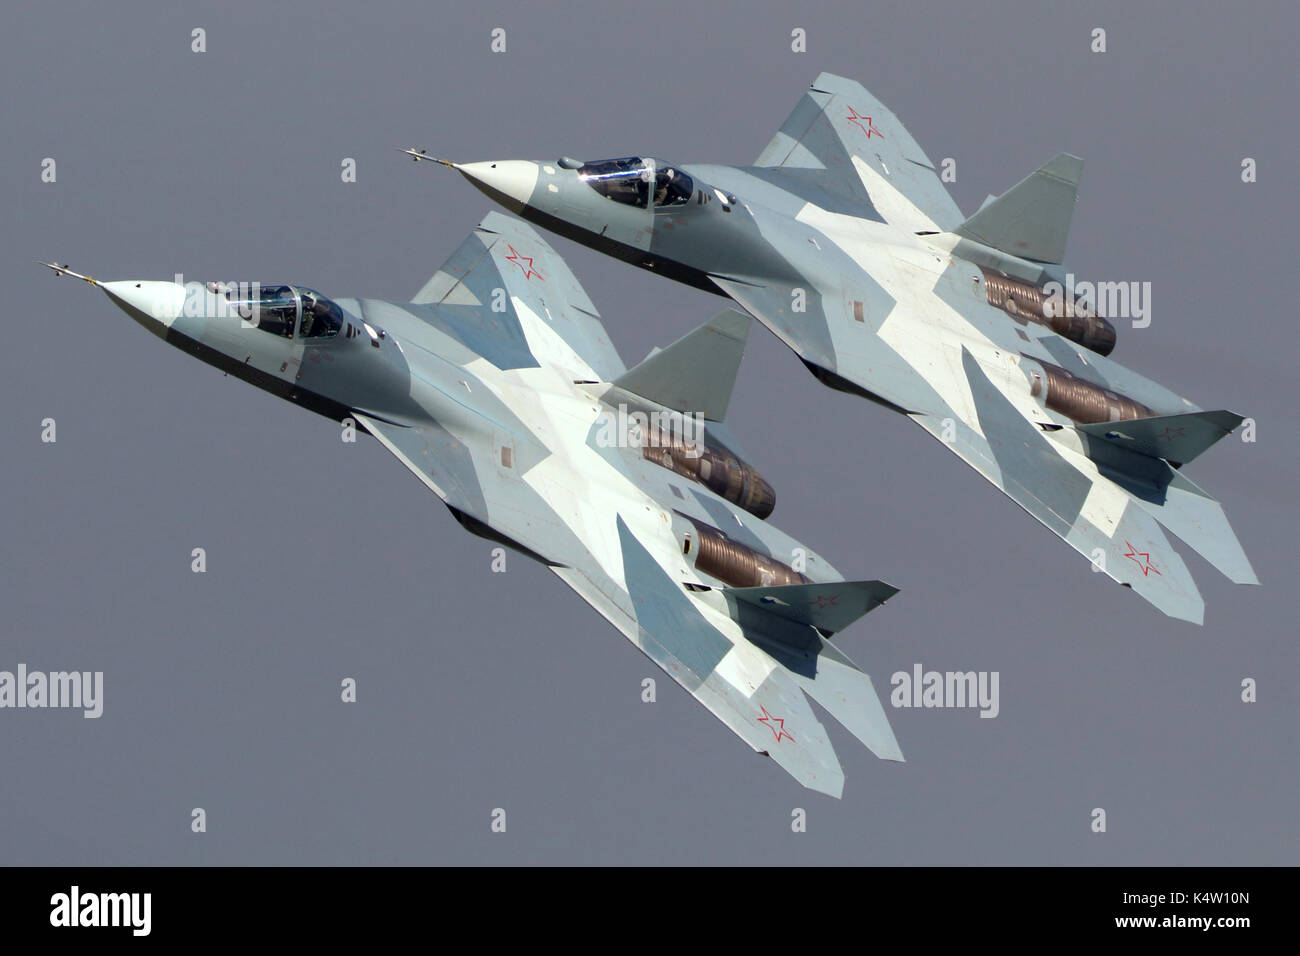 Zhukovsky, Moscow Region, Russia - August 24, 2013: Pair of Sukhoi T-50 PAK-FA 052 BLUE and 051 BLUE modern russian jet fighters performing demonstrat Stock Photo